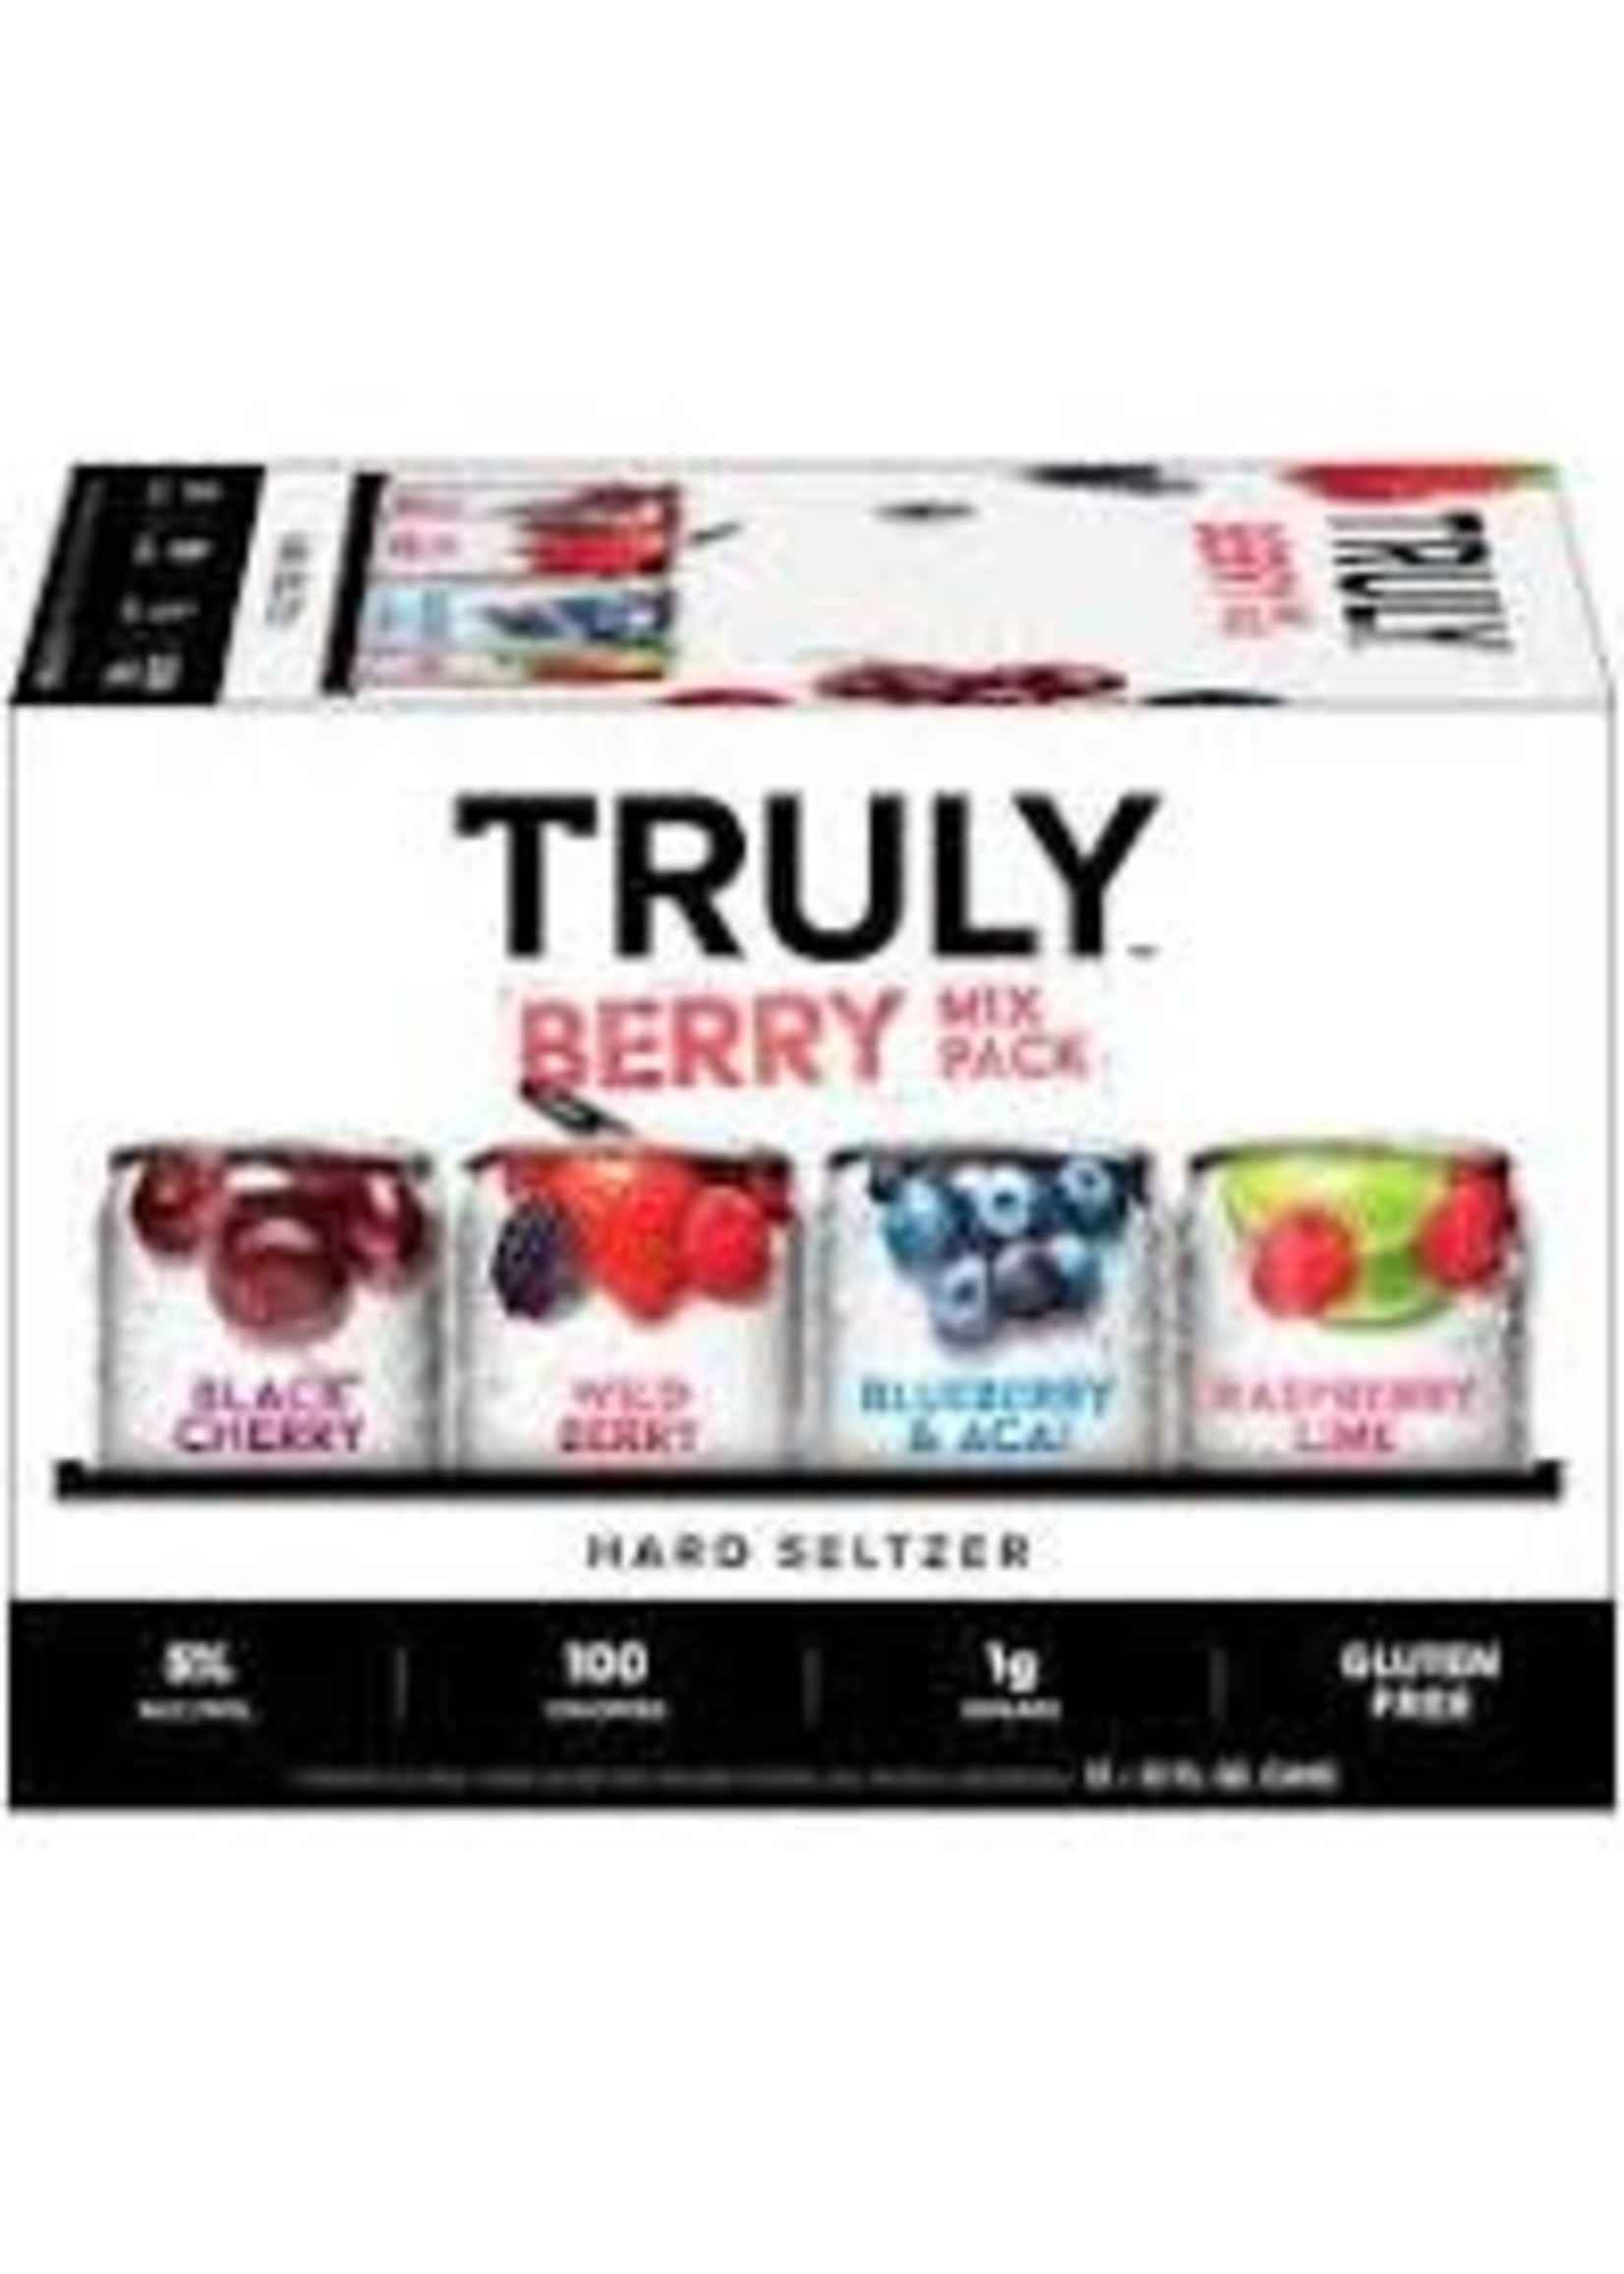 TRULY TRULY	BERRY VARIETY 12PK	12 OZ